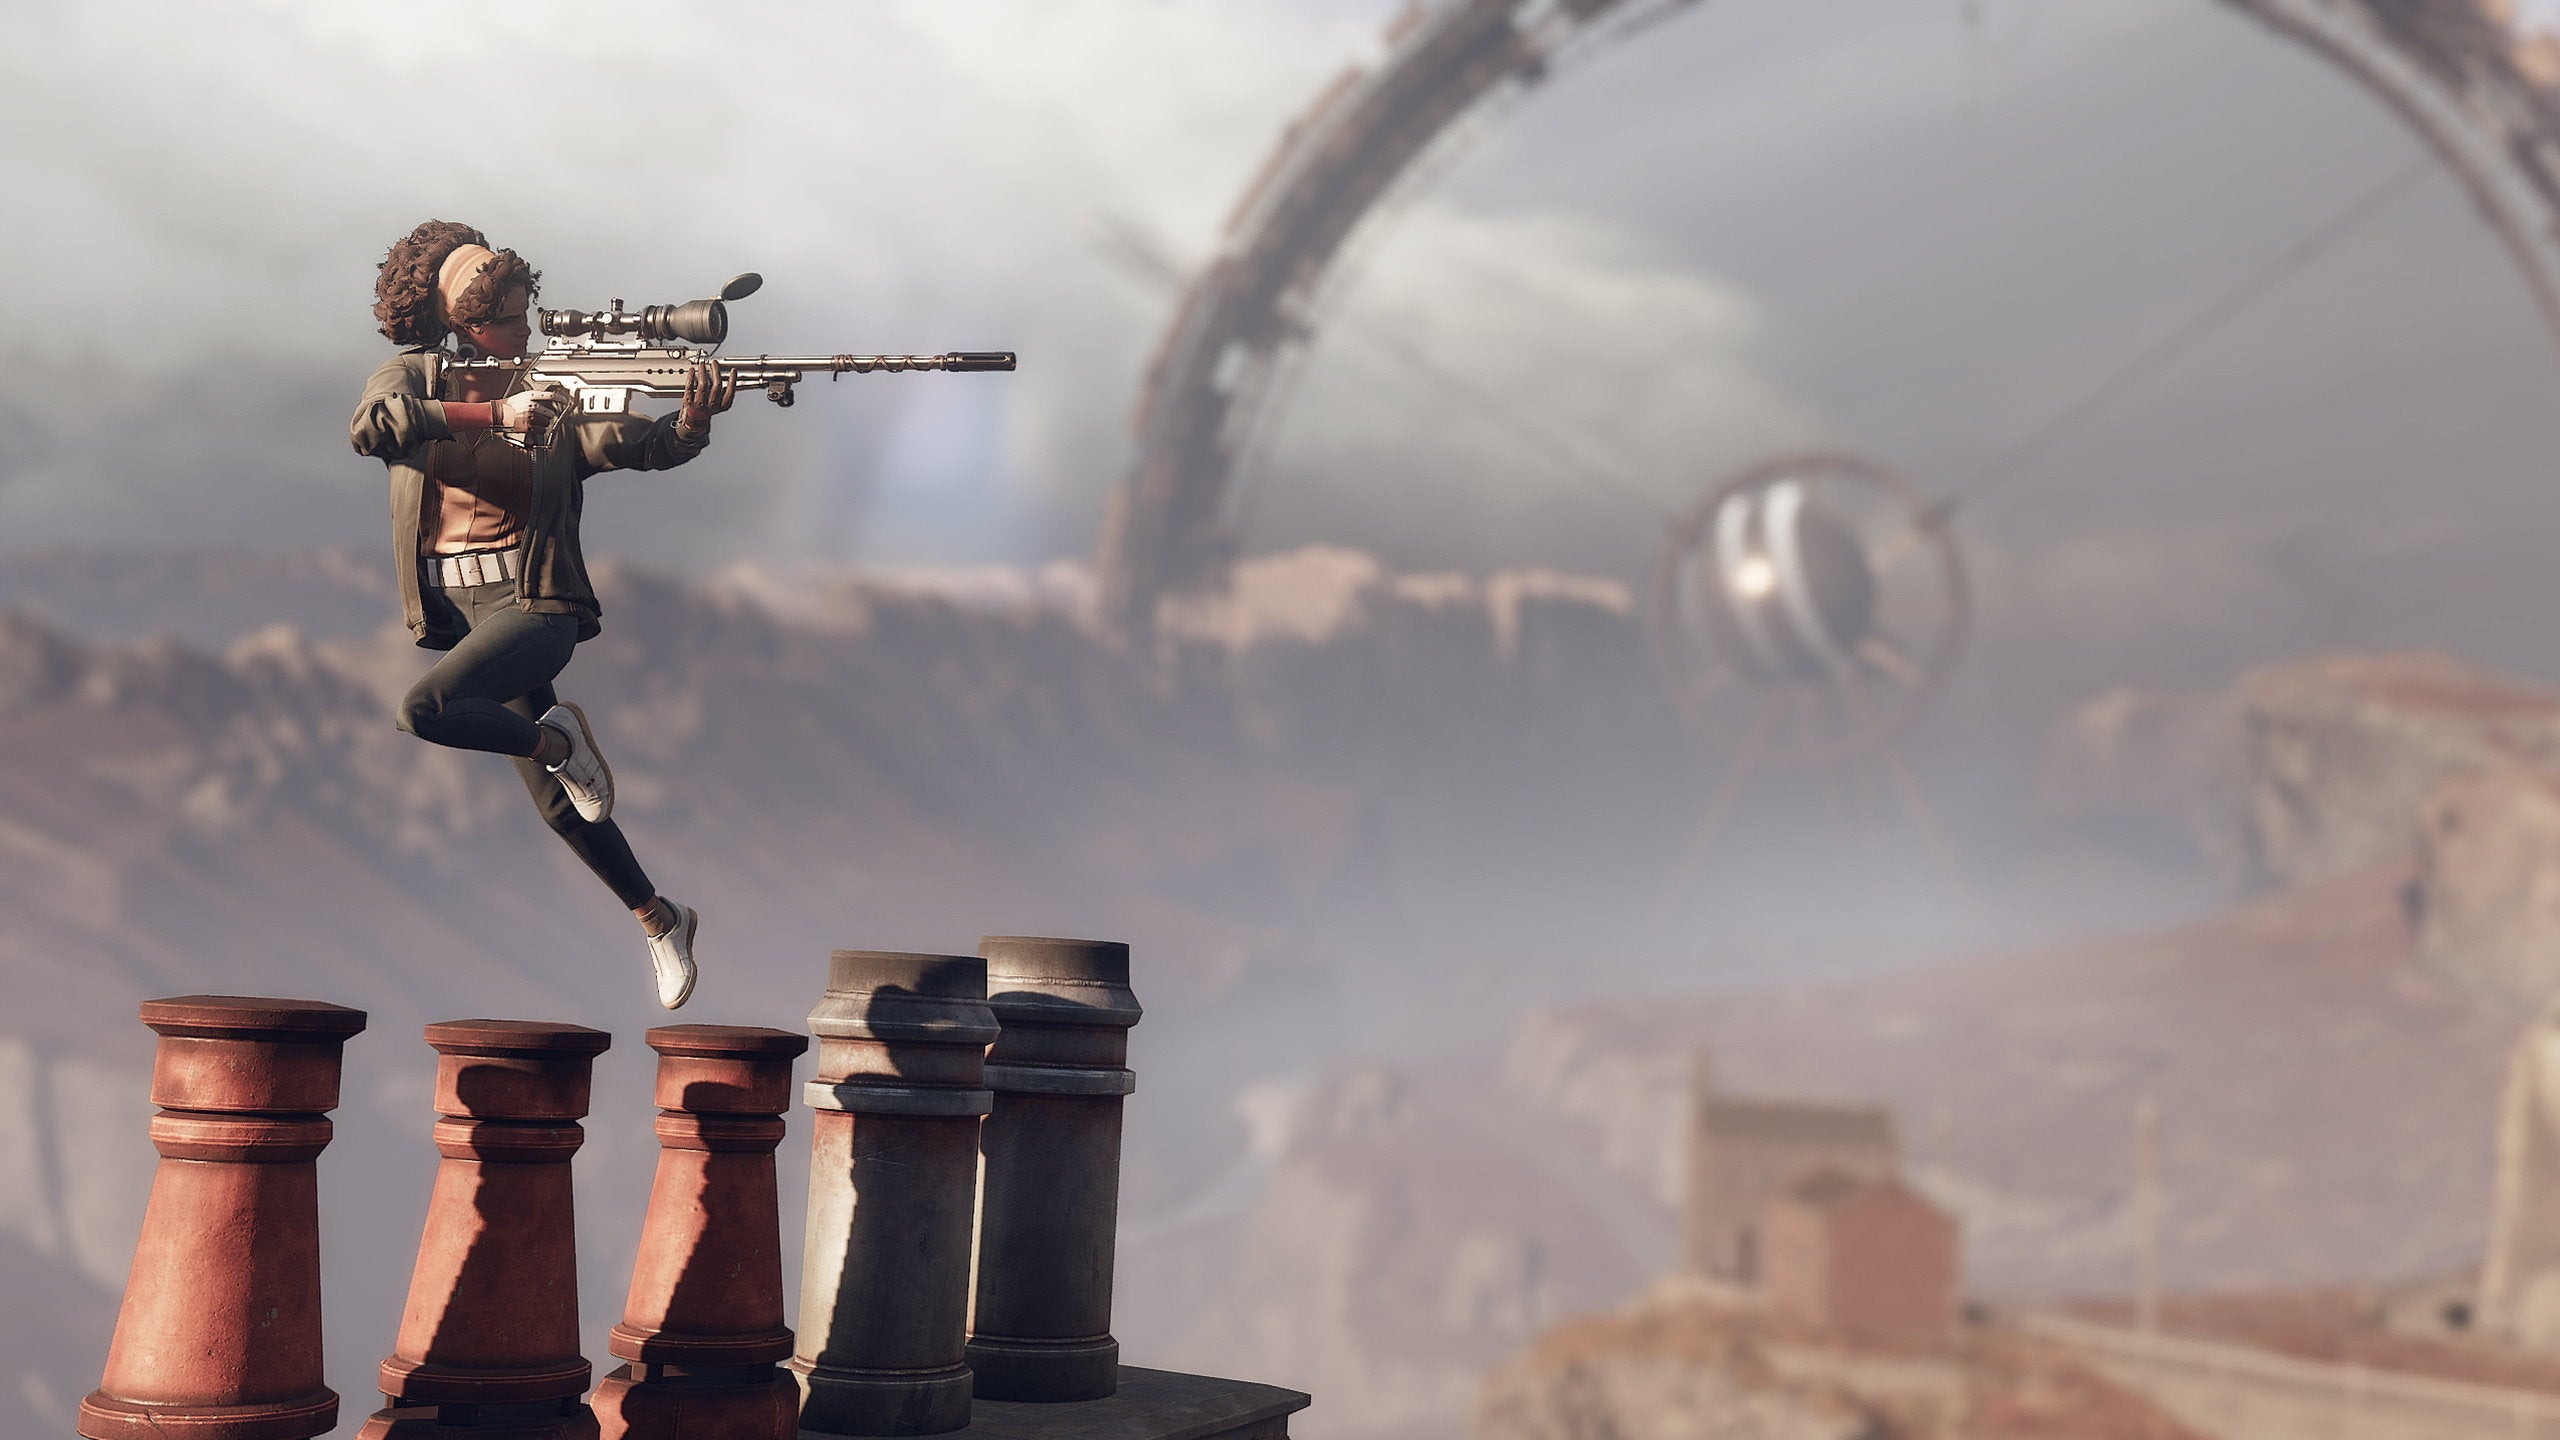 Juliana jumps onto the roof holding a sniper rifle in a deathloop